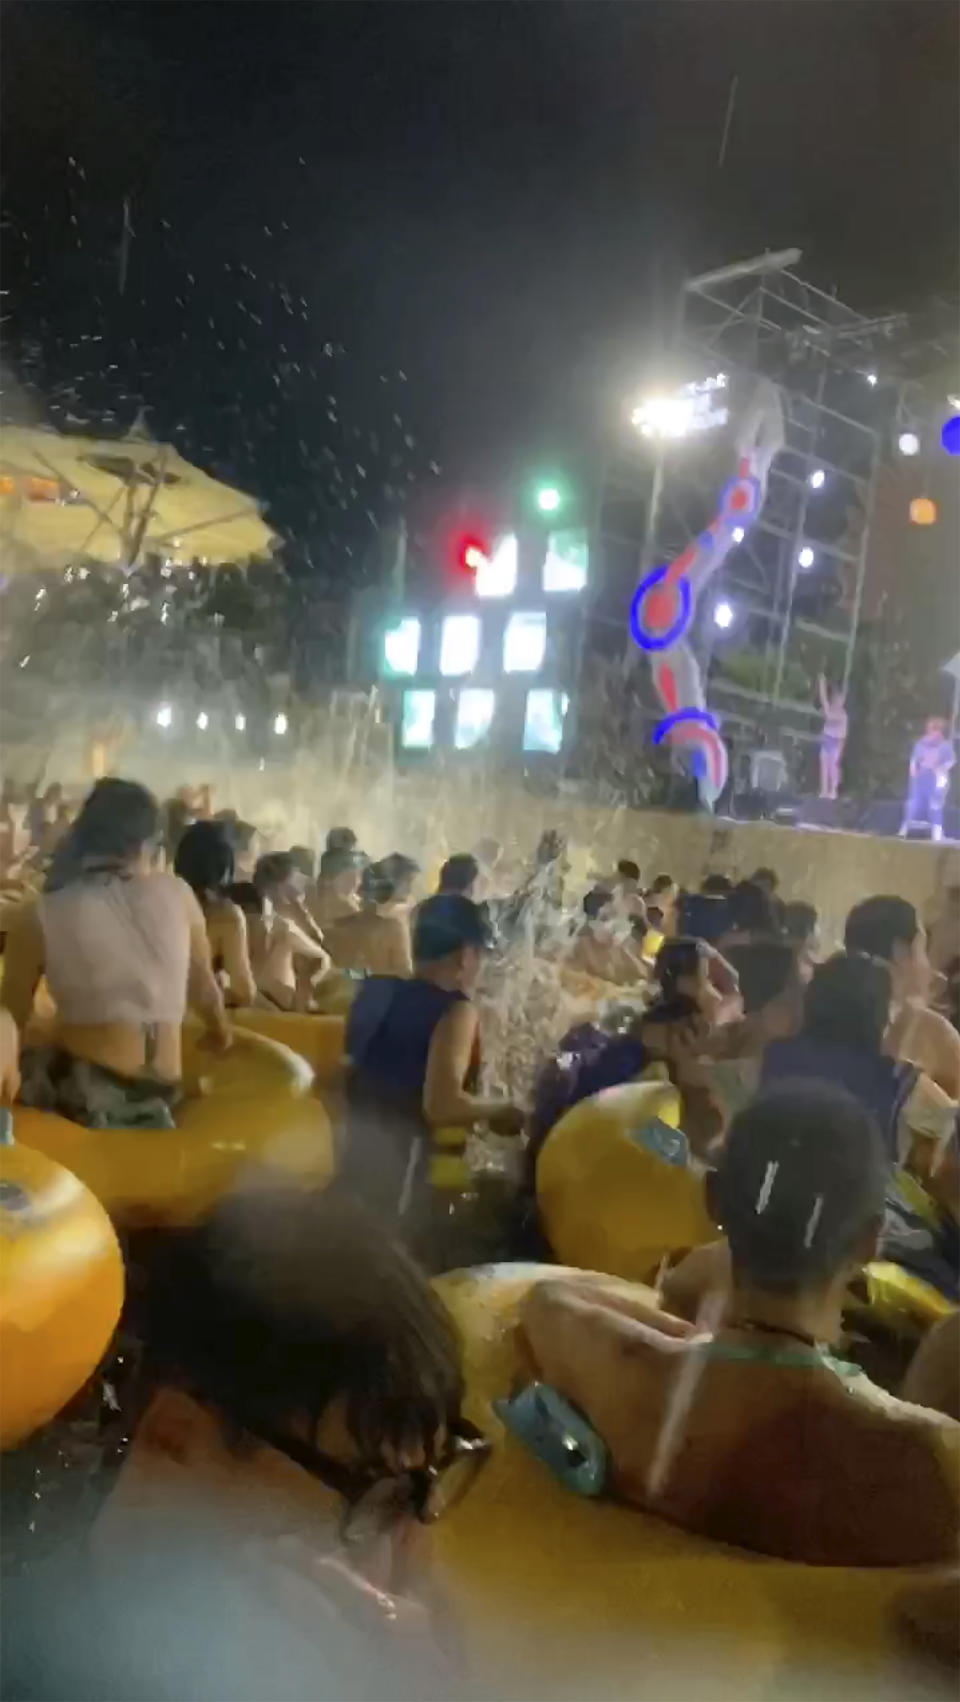 This image made from an Aug 3, 2020 video shows crowd gather in a pool as they watch performers on a stage at Wuhan Maya Beach Water Park in Wuhan, central China. For more than two months, the 11 million residents of Wuhan endured a strict lockdown as coronavirus raced around the city. Now, some are letting loose en masse at rocking nighttime pool parties at the popular amusement park chain. The park reopened in late June, and the crowds have picked up in August. (anonymous photo via AP)